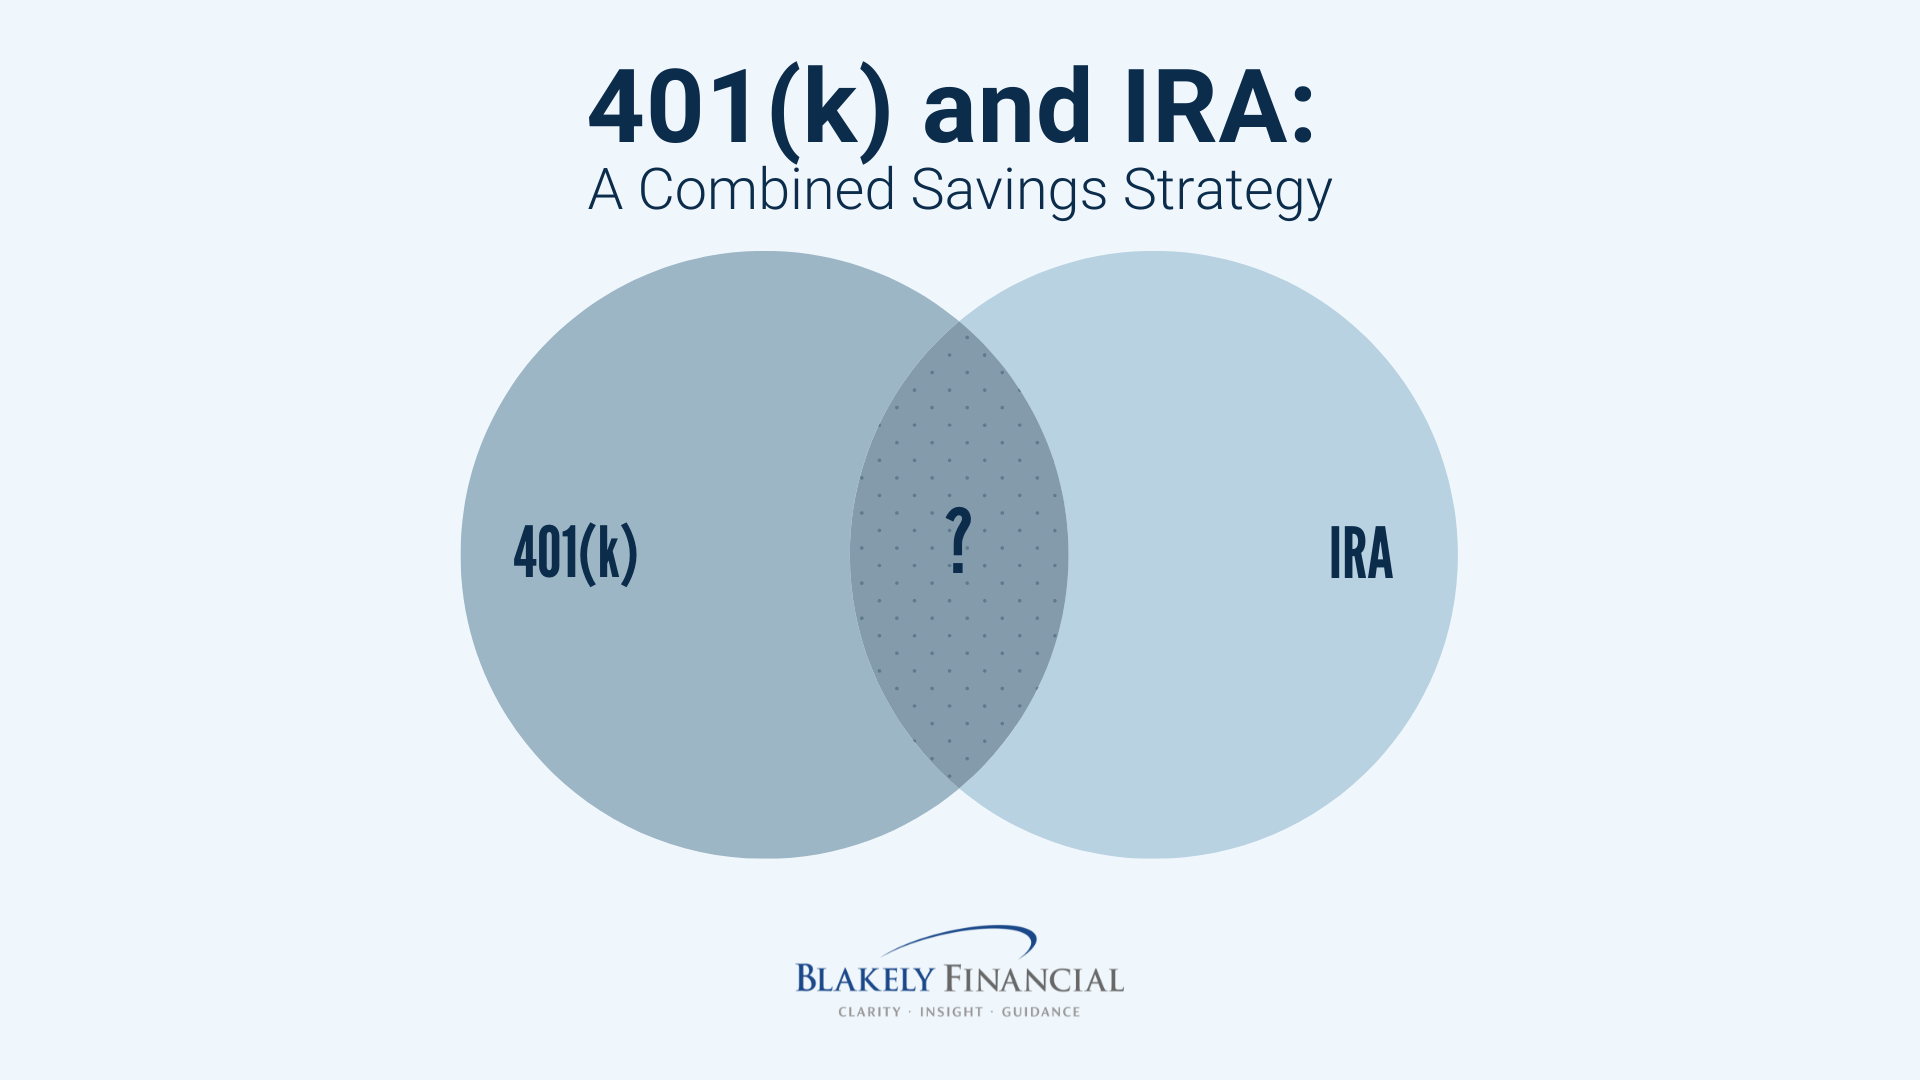 401(k) and IRA: A Combined Savings Strategy